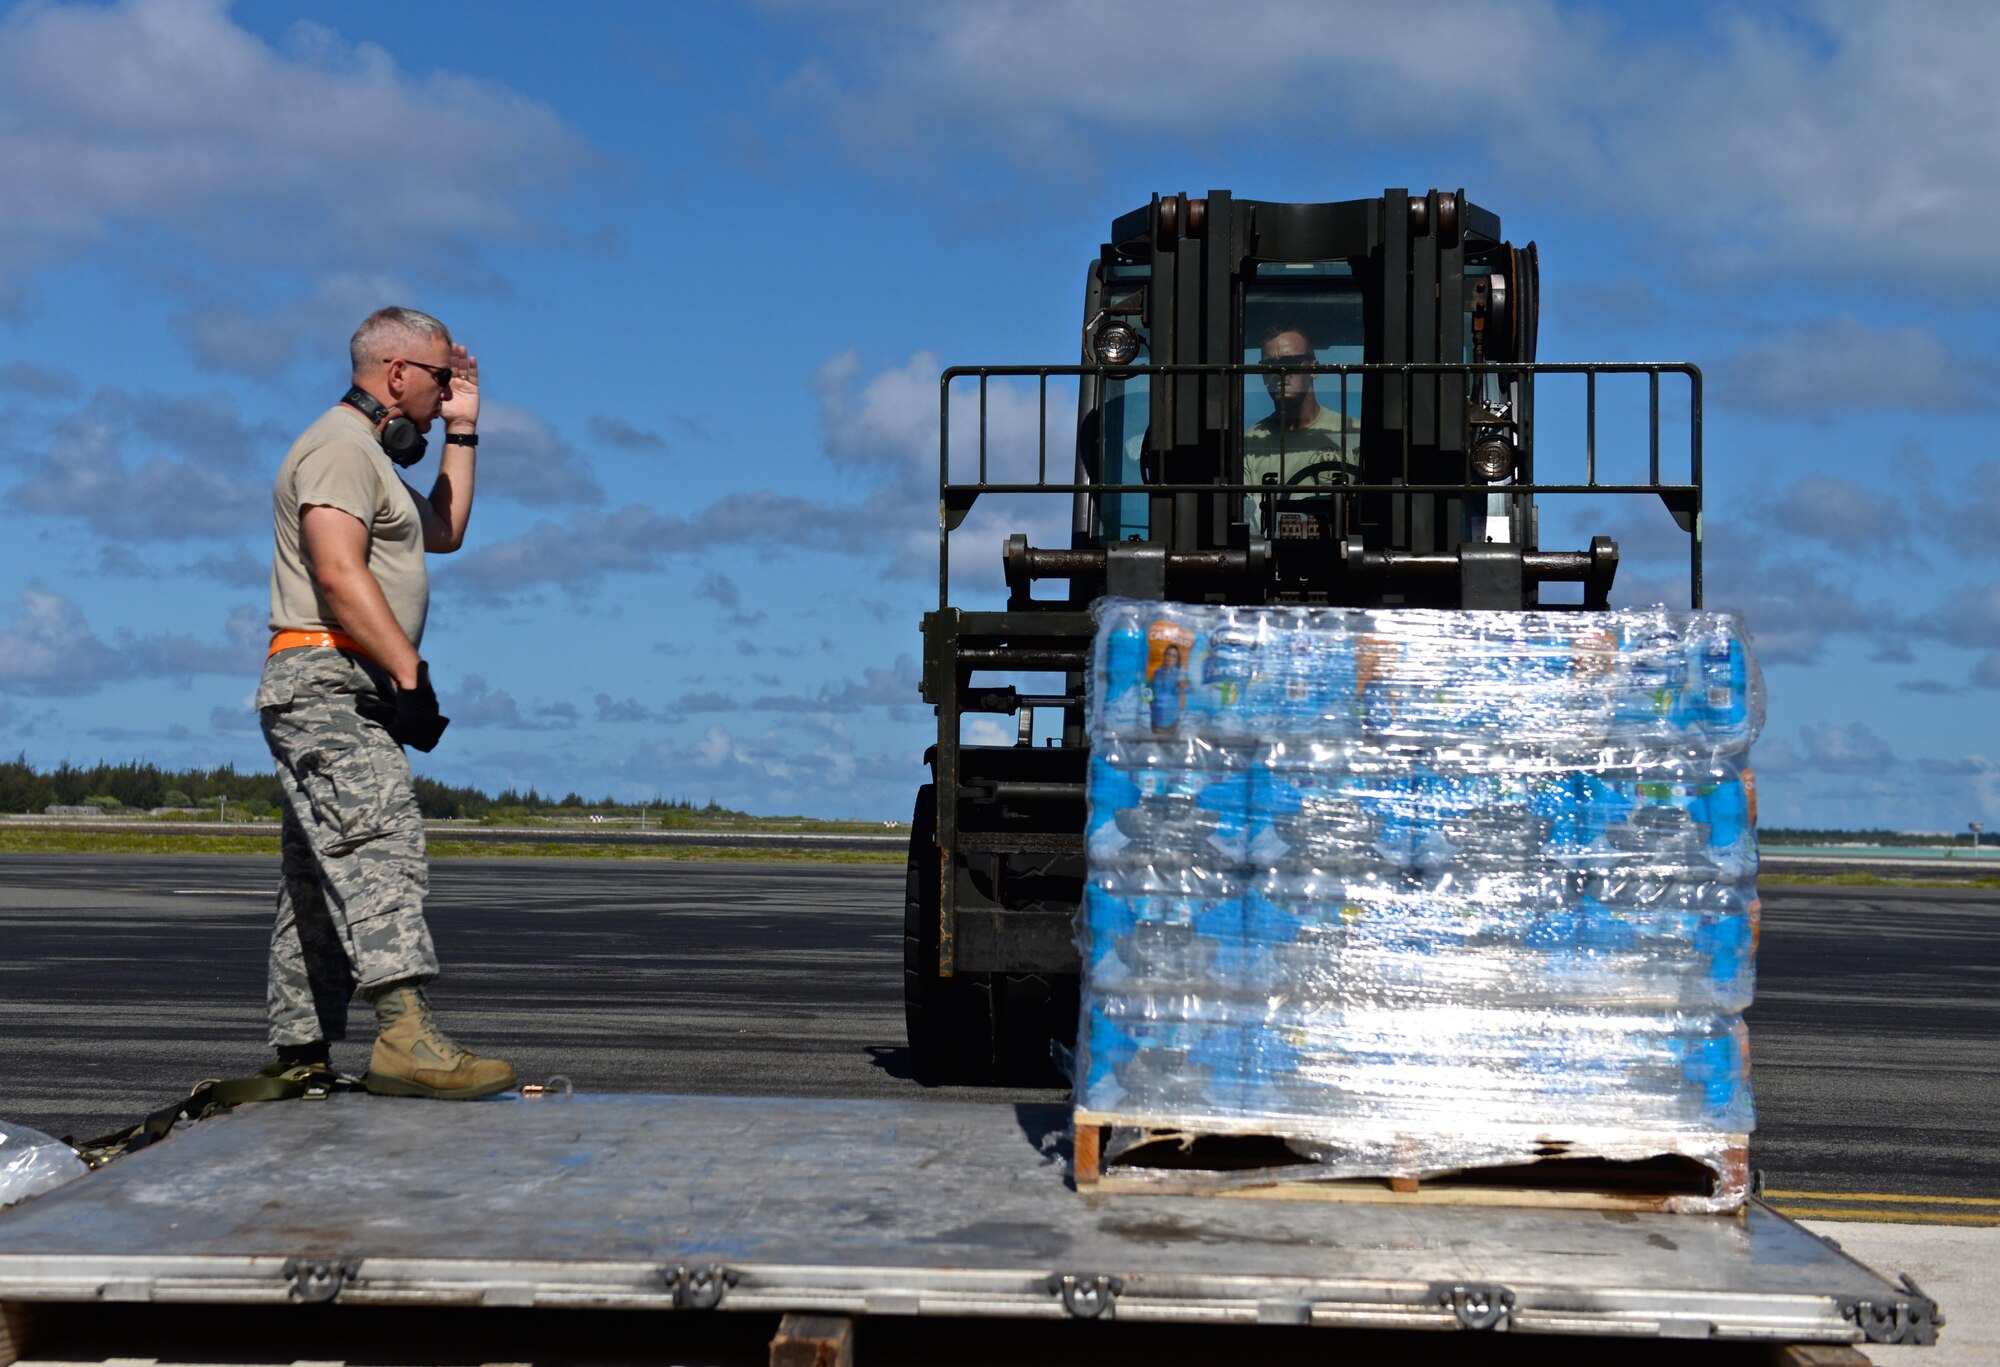 U.S. Air Force Master Sgt. Iain Morrison, 36th Contingency Response Group superintendent of operations, plans and programs, guides Tech. Sgt. Randy Walgren, 36th Mobility Response Squadron NCO in charge of aerial port operations, in moving drinking water rations, July 20, 2015, Wake Island Airfield. The 36th CRG deployed from Andersen Air Force Base, Guam, to assist in airfield storm recovery efforts after the small atoll was evacuated a few days earlier for Typhoon Halola. (U.S. Air Force photo by Senior Airman Alexander W. Riedel/Released)